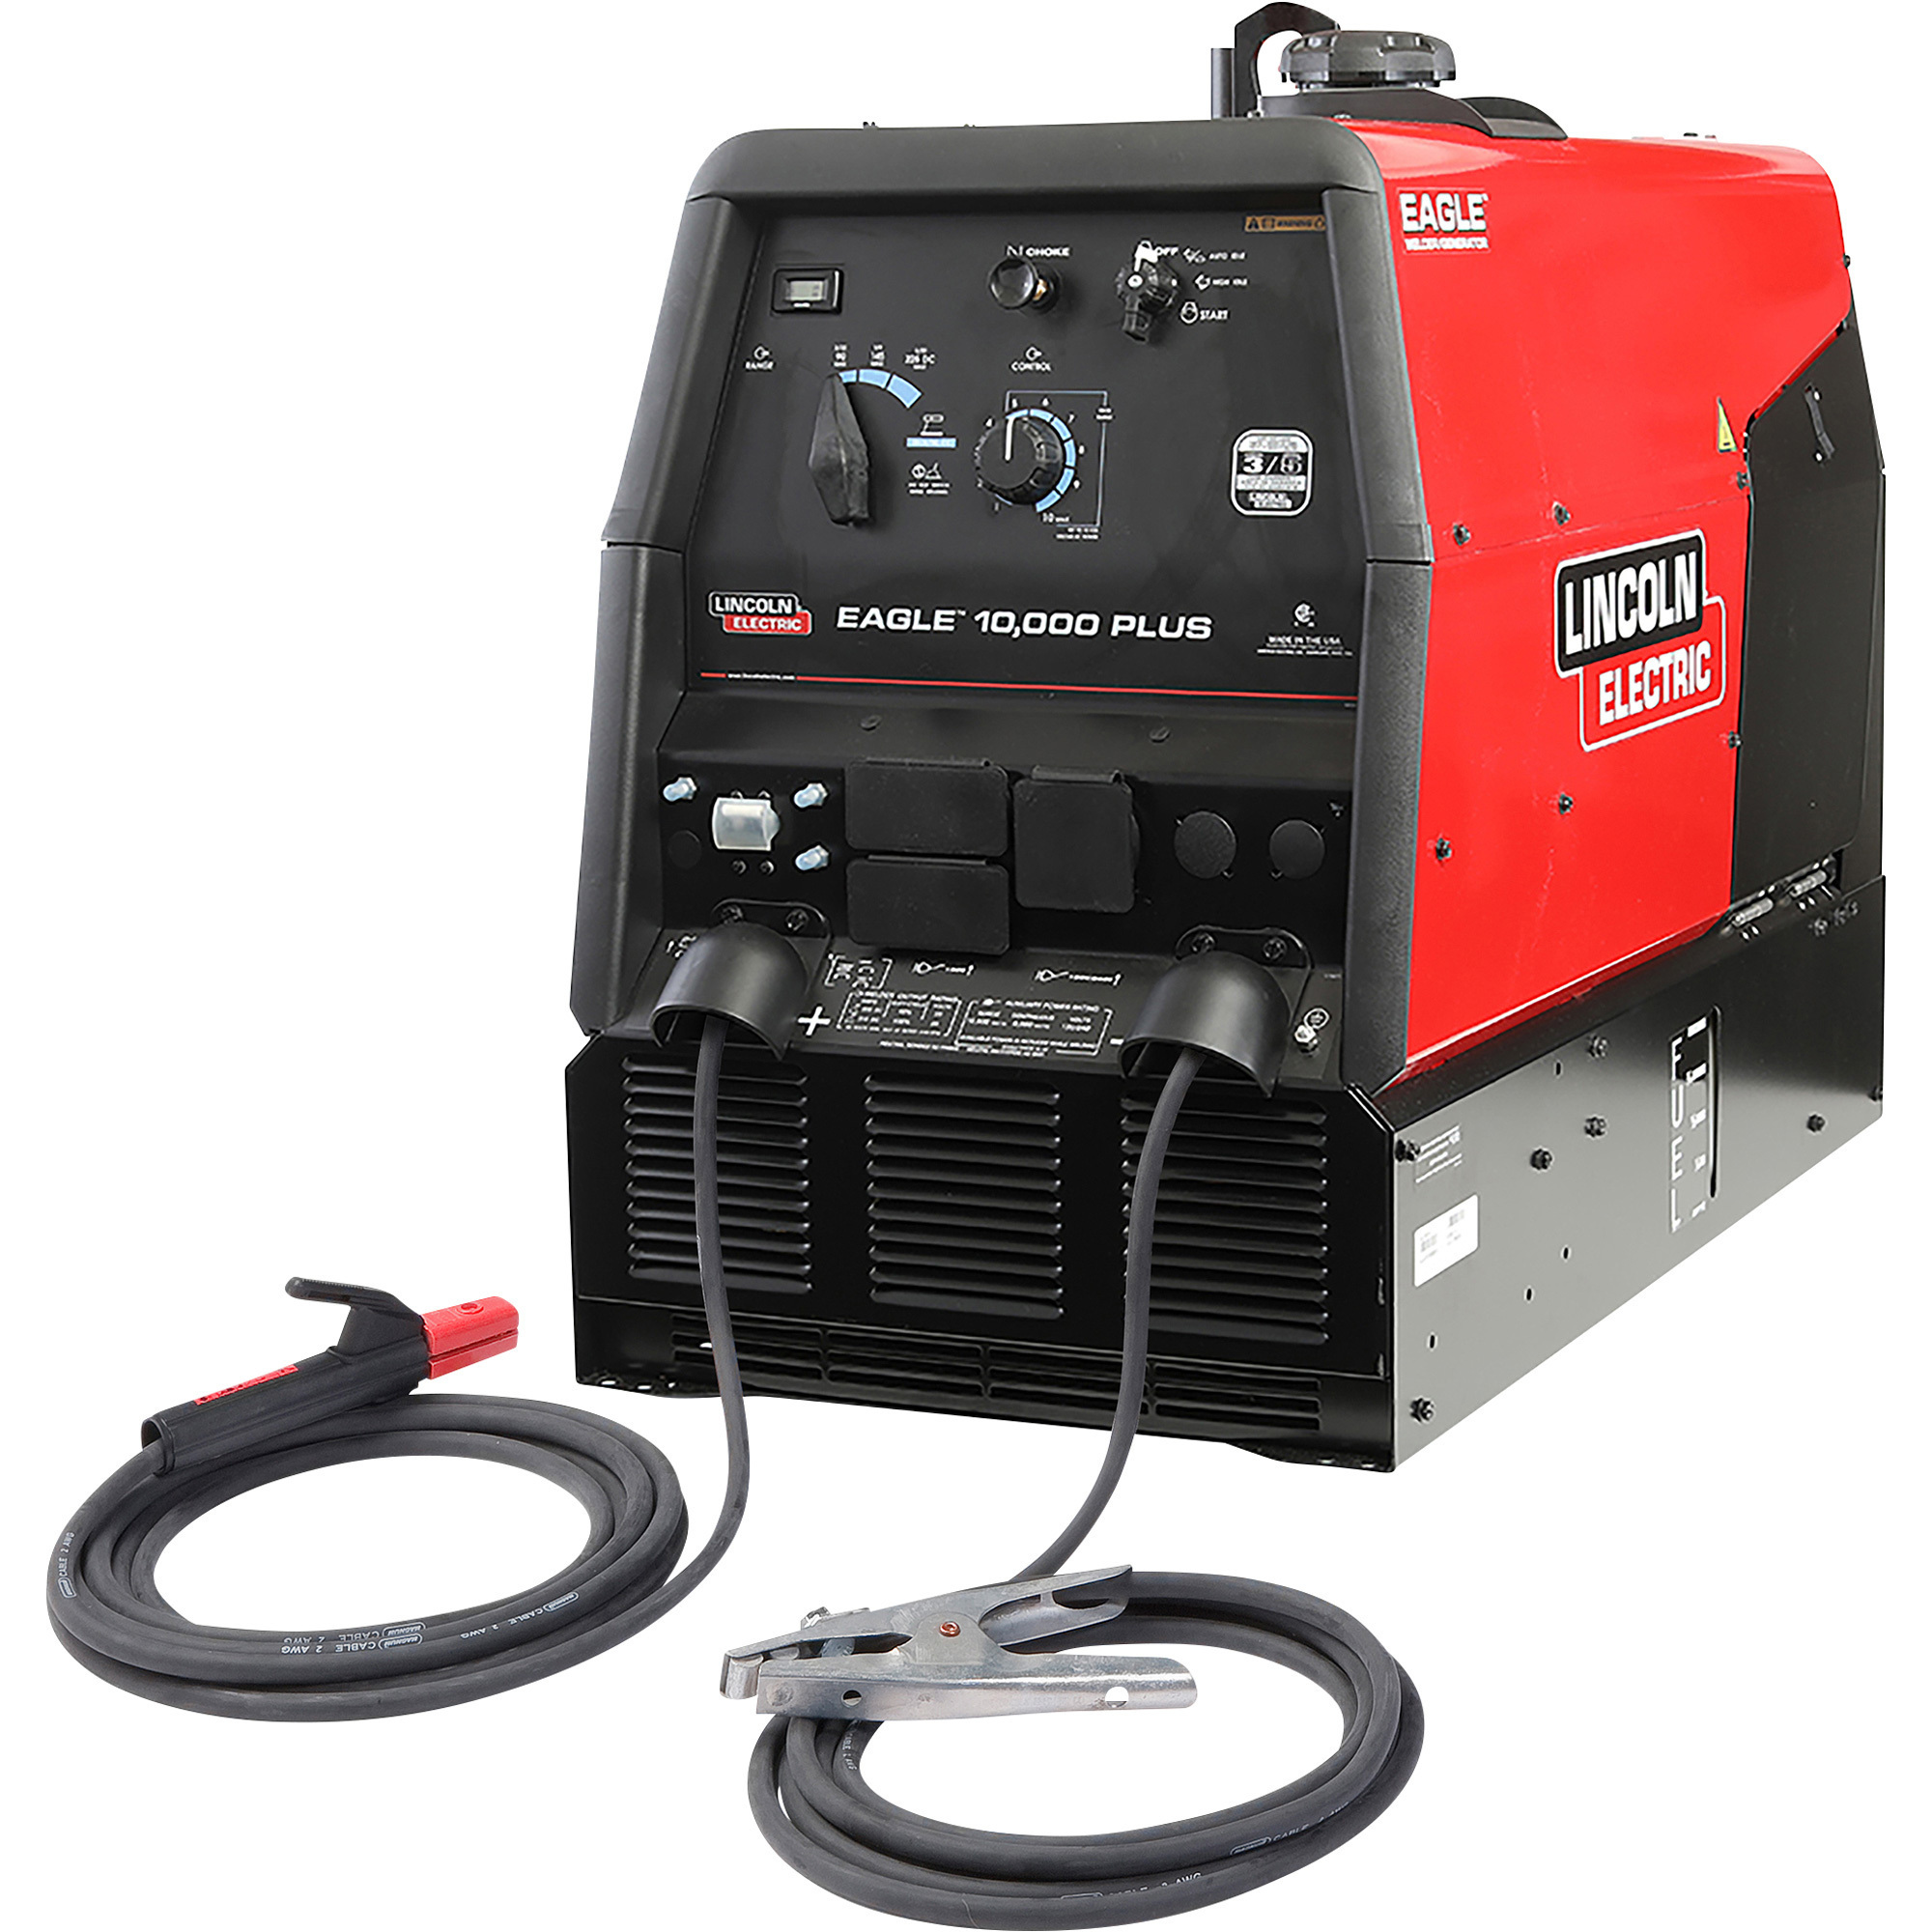 Lincoln Electric Eagle 10,000 Plus Engine Driven DC Arc Welder/AC Generator with Electric Start, 50-225 Amp DC Output, 120/240 Volt, 10,000 Watt AC